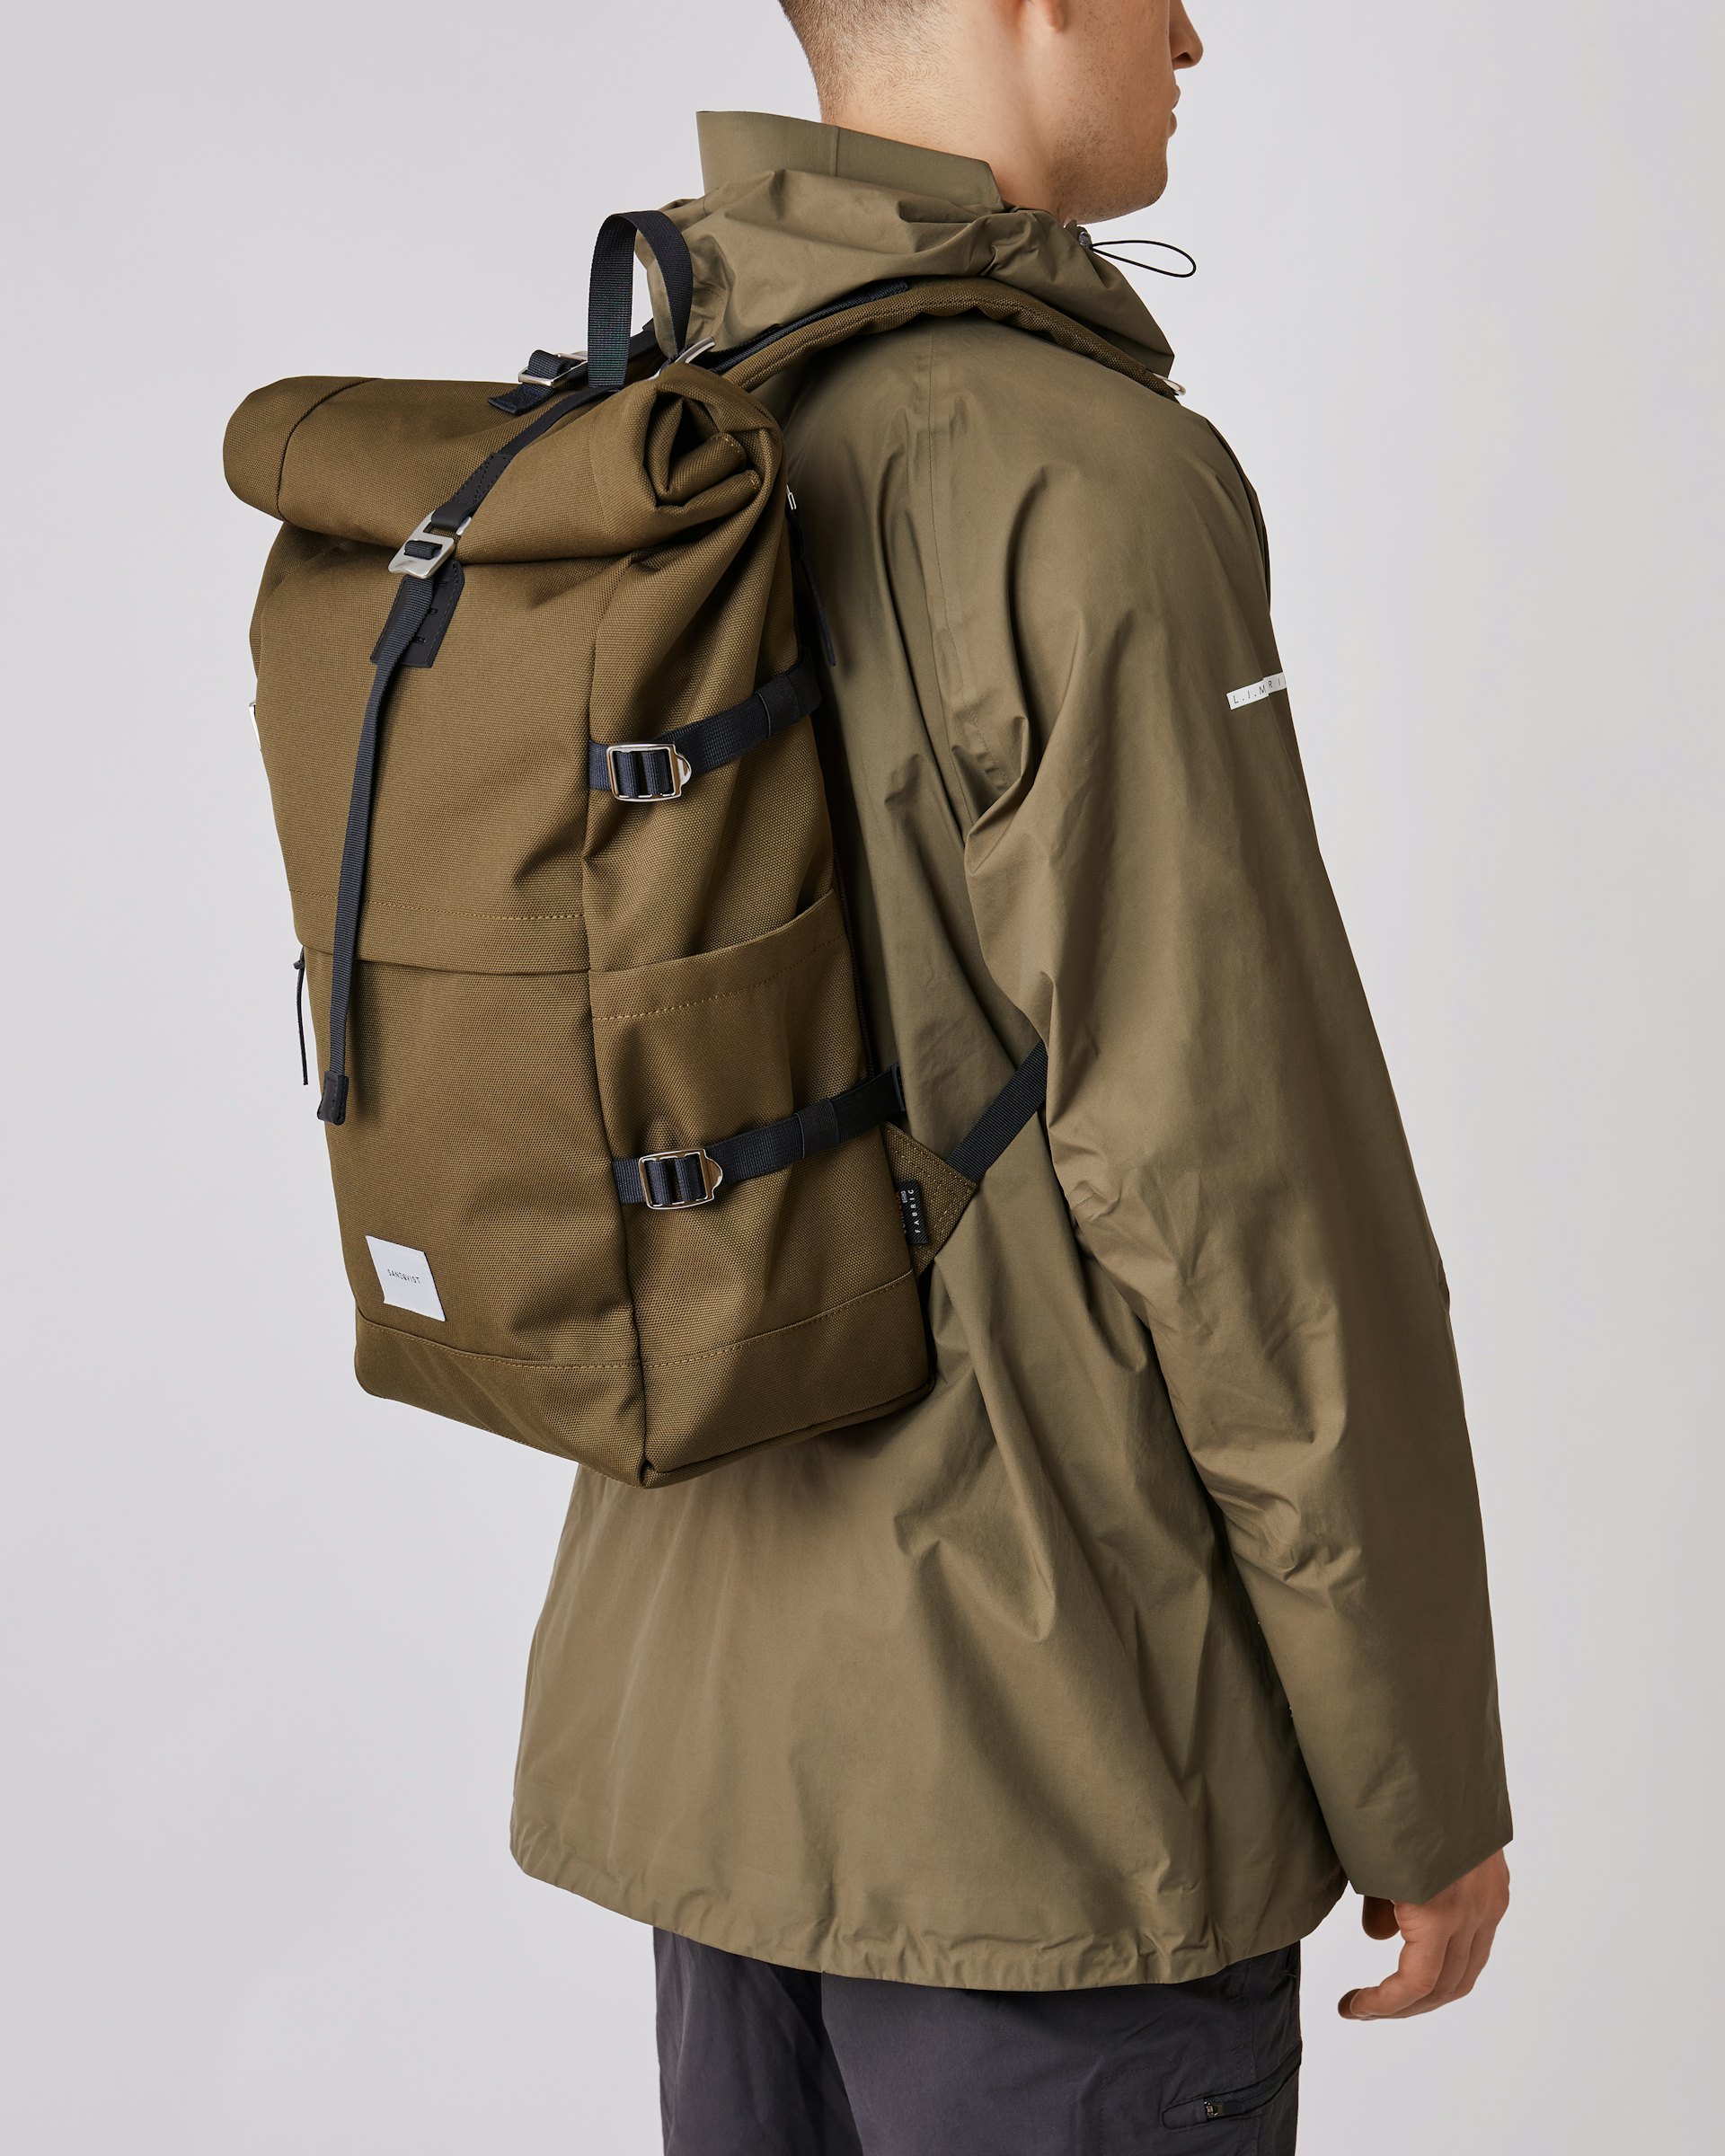 Bernt belongs to the category Backpacks and is in color olive (7 of 7)